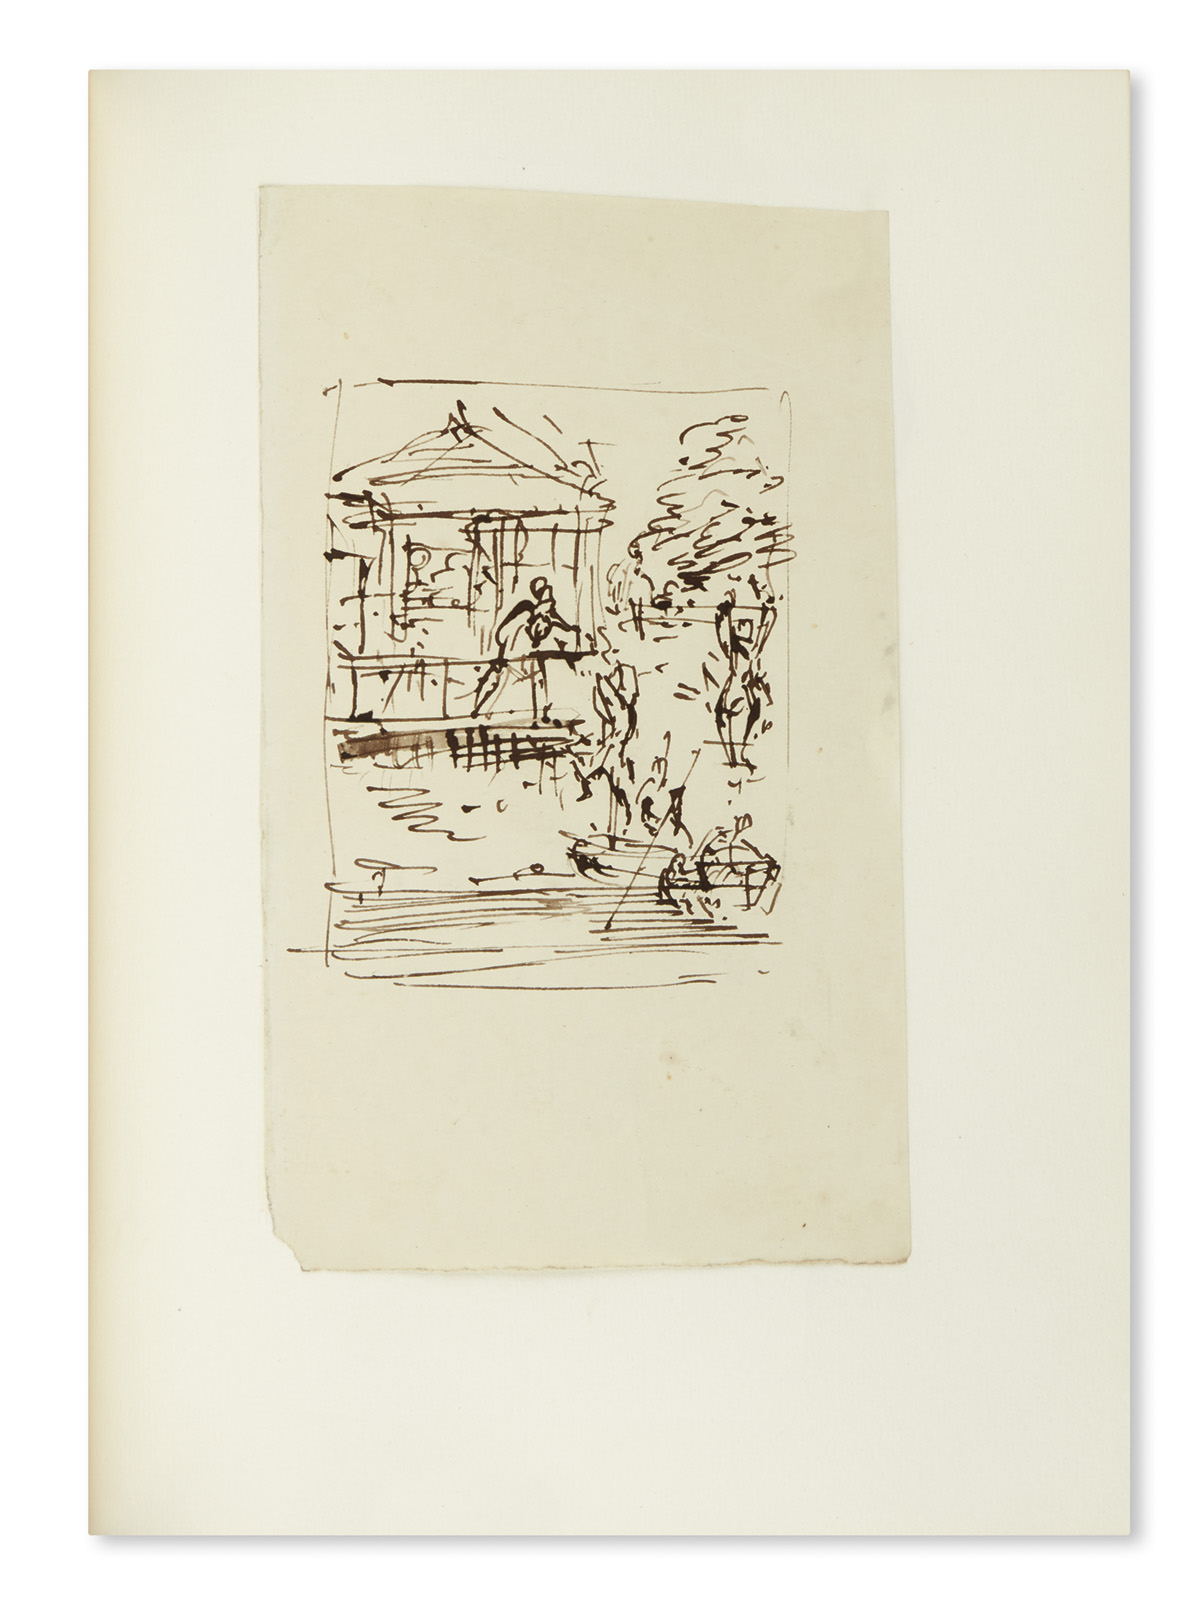 CRUIKSHANK, GEORGE. Over 200 drawings in ink or pencil, 6 Signed, small fragmentary sketches,